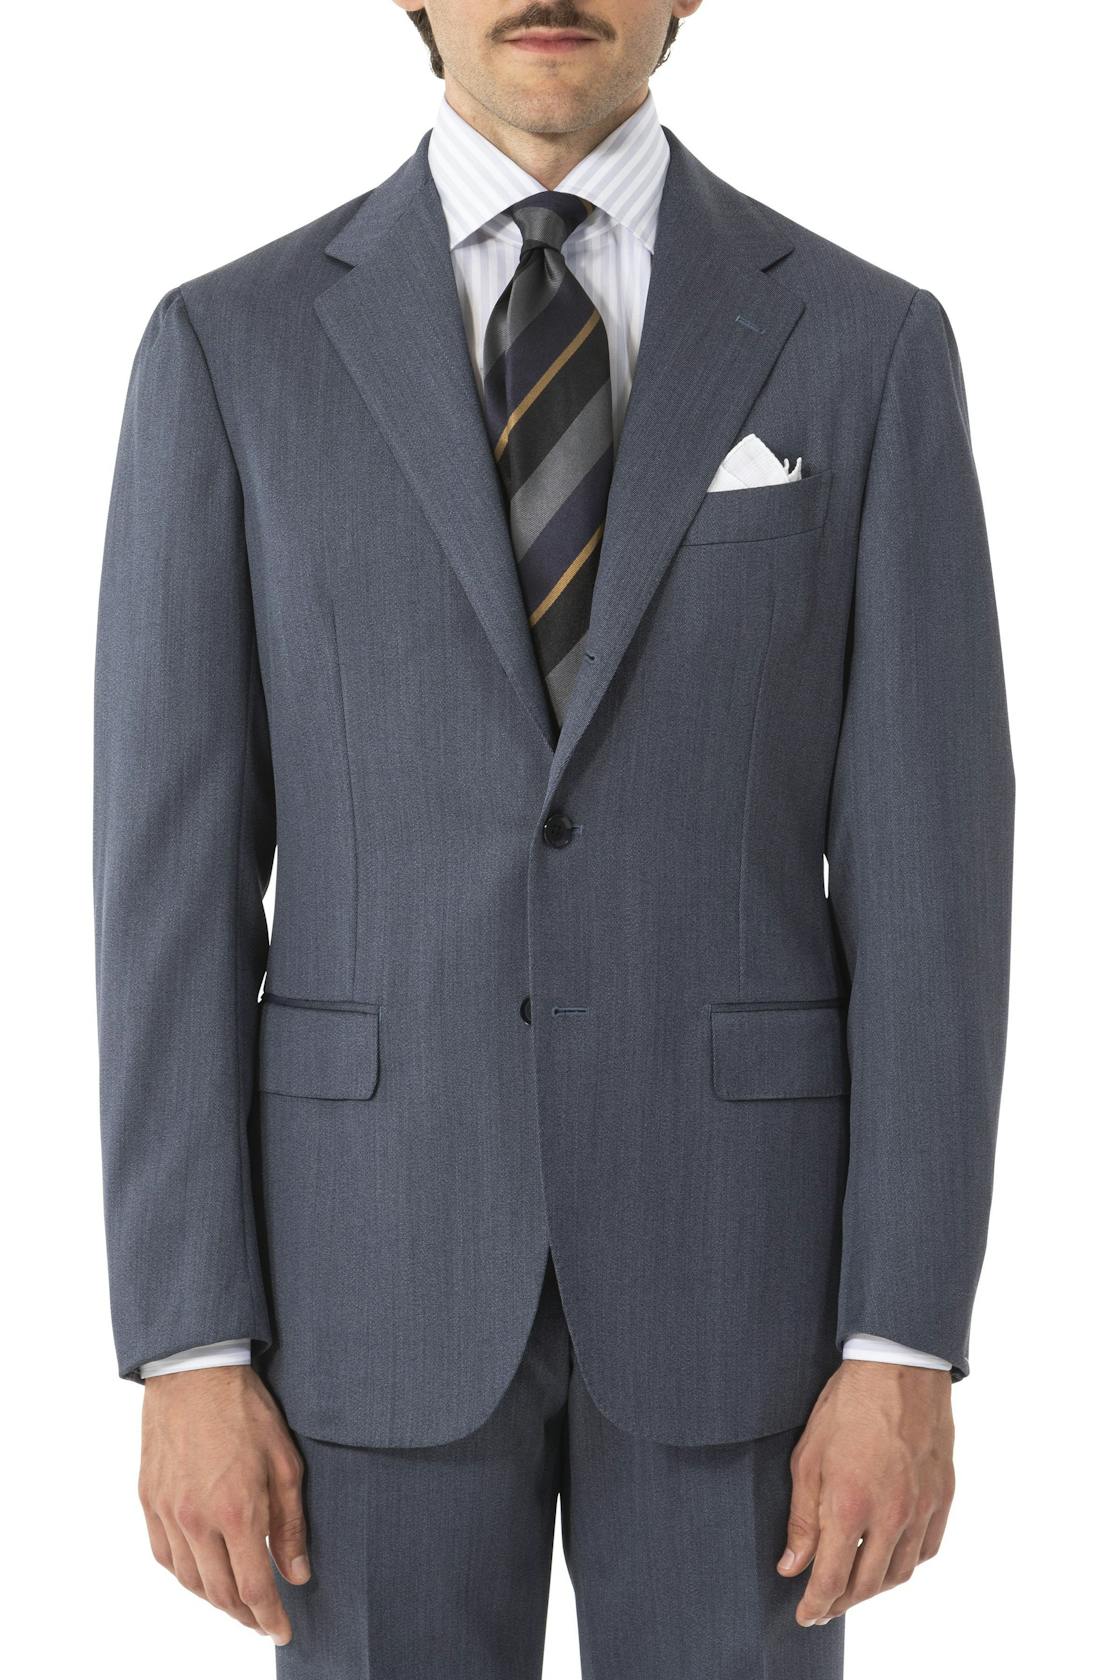 The Armoury by Ring Jacket Model 3B Denim Blue Wool Covert Suit